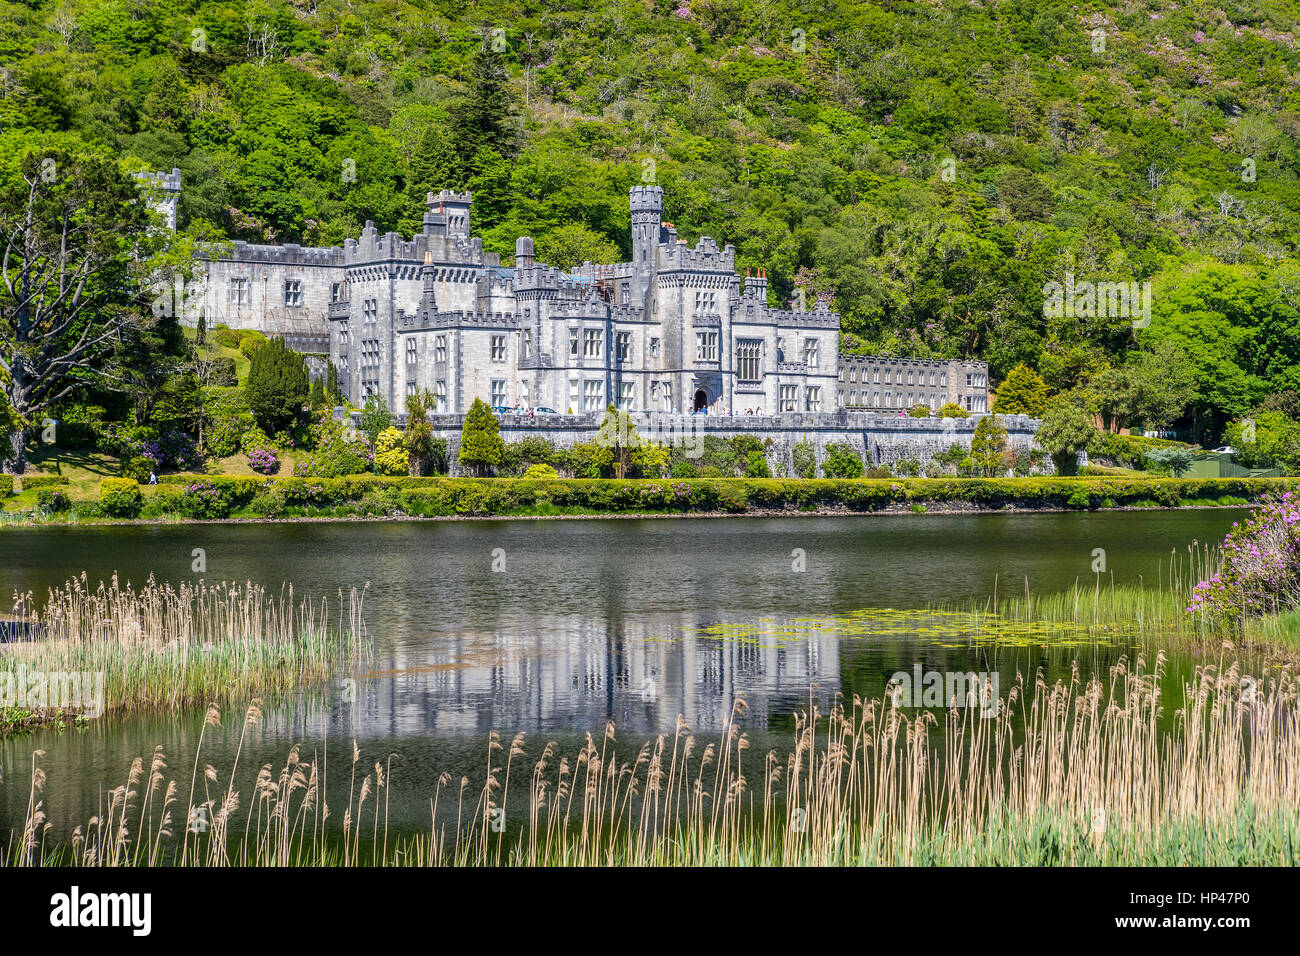 Kylemore Abbey a Benedictine monastery founded in 1920 on the grounds of Kylemore Castle, Connemara, County Galway, Ireland, Europe. Stock Photo